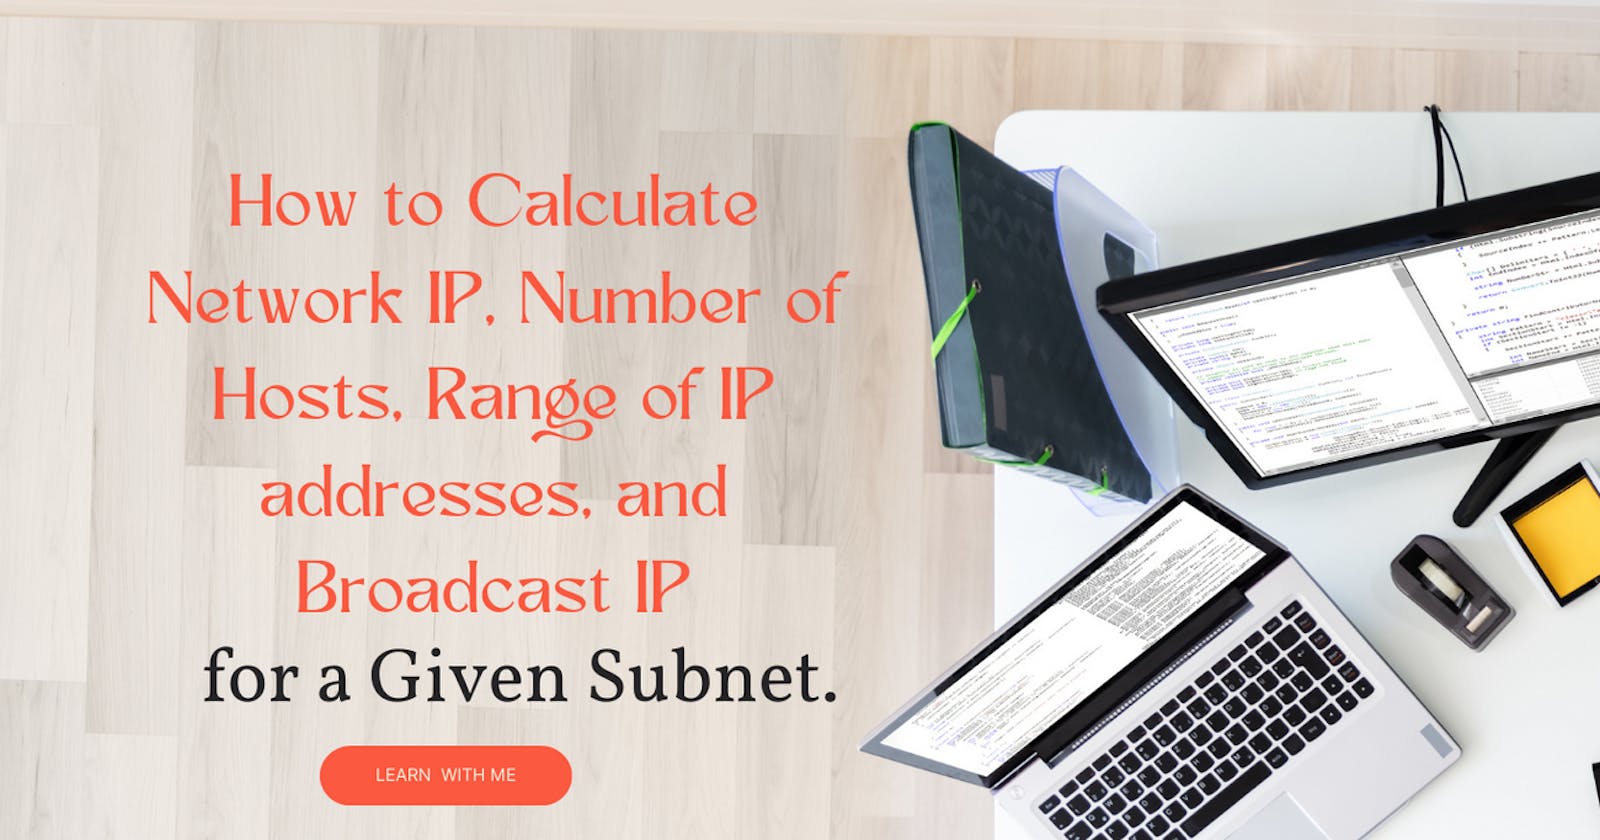 How to Calculate Network IP, Number of Hosts, Range of IP addresses, and Broadcast IP from a Given Subnet.